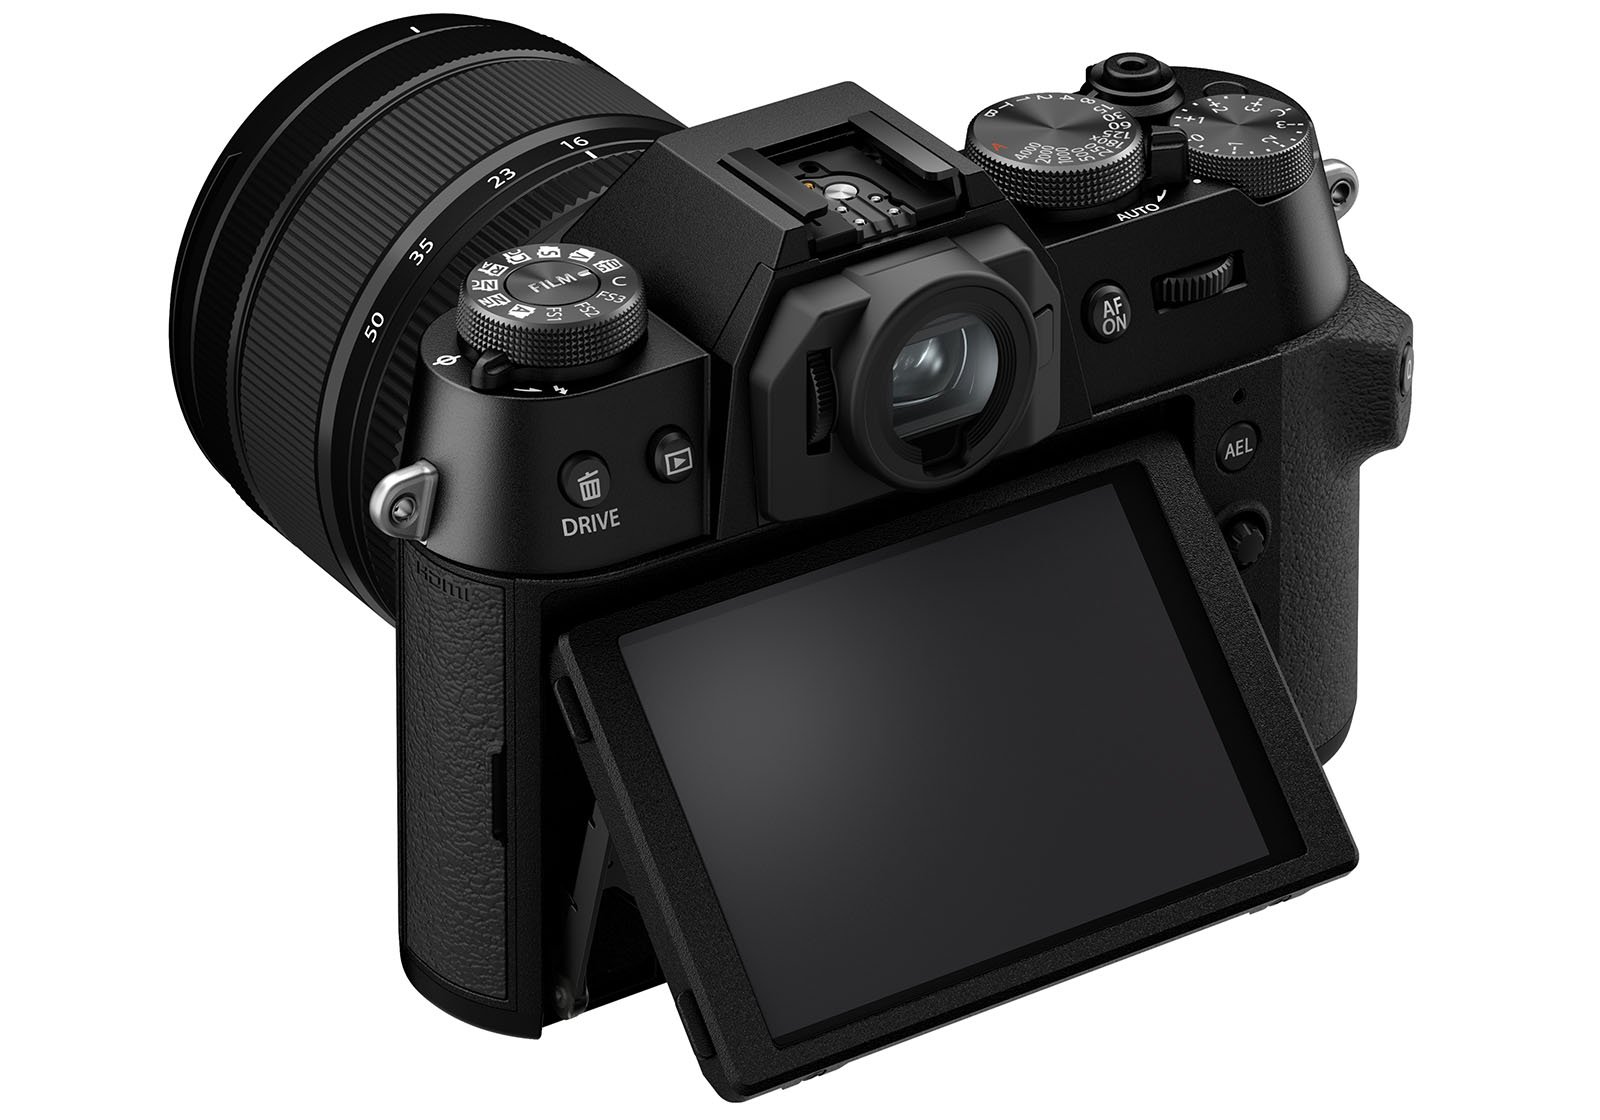 A black digital camera with a tilting LCD screen is shown from the back. The camera features various dials and buttons, including a mode dial, a viewfinder, and a large lens. The design has a textured grip and several controls for adjusting settings.